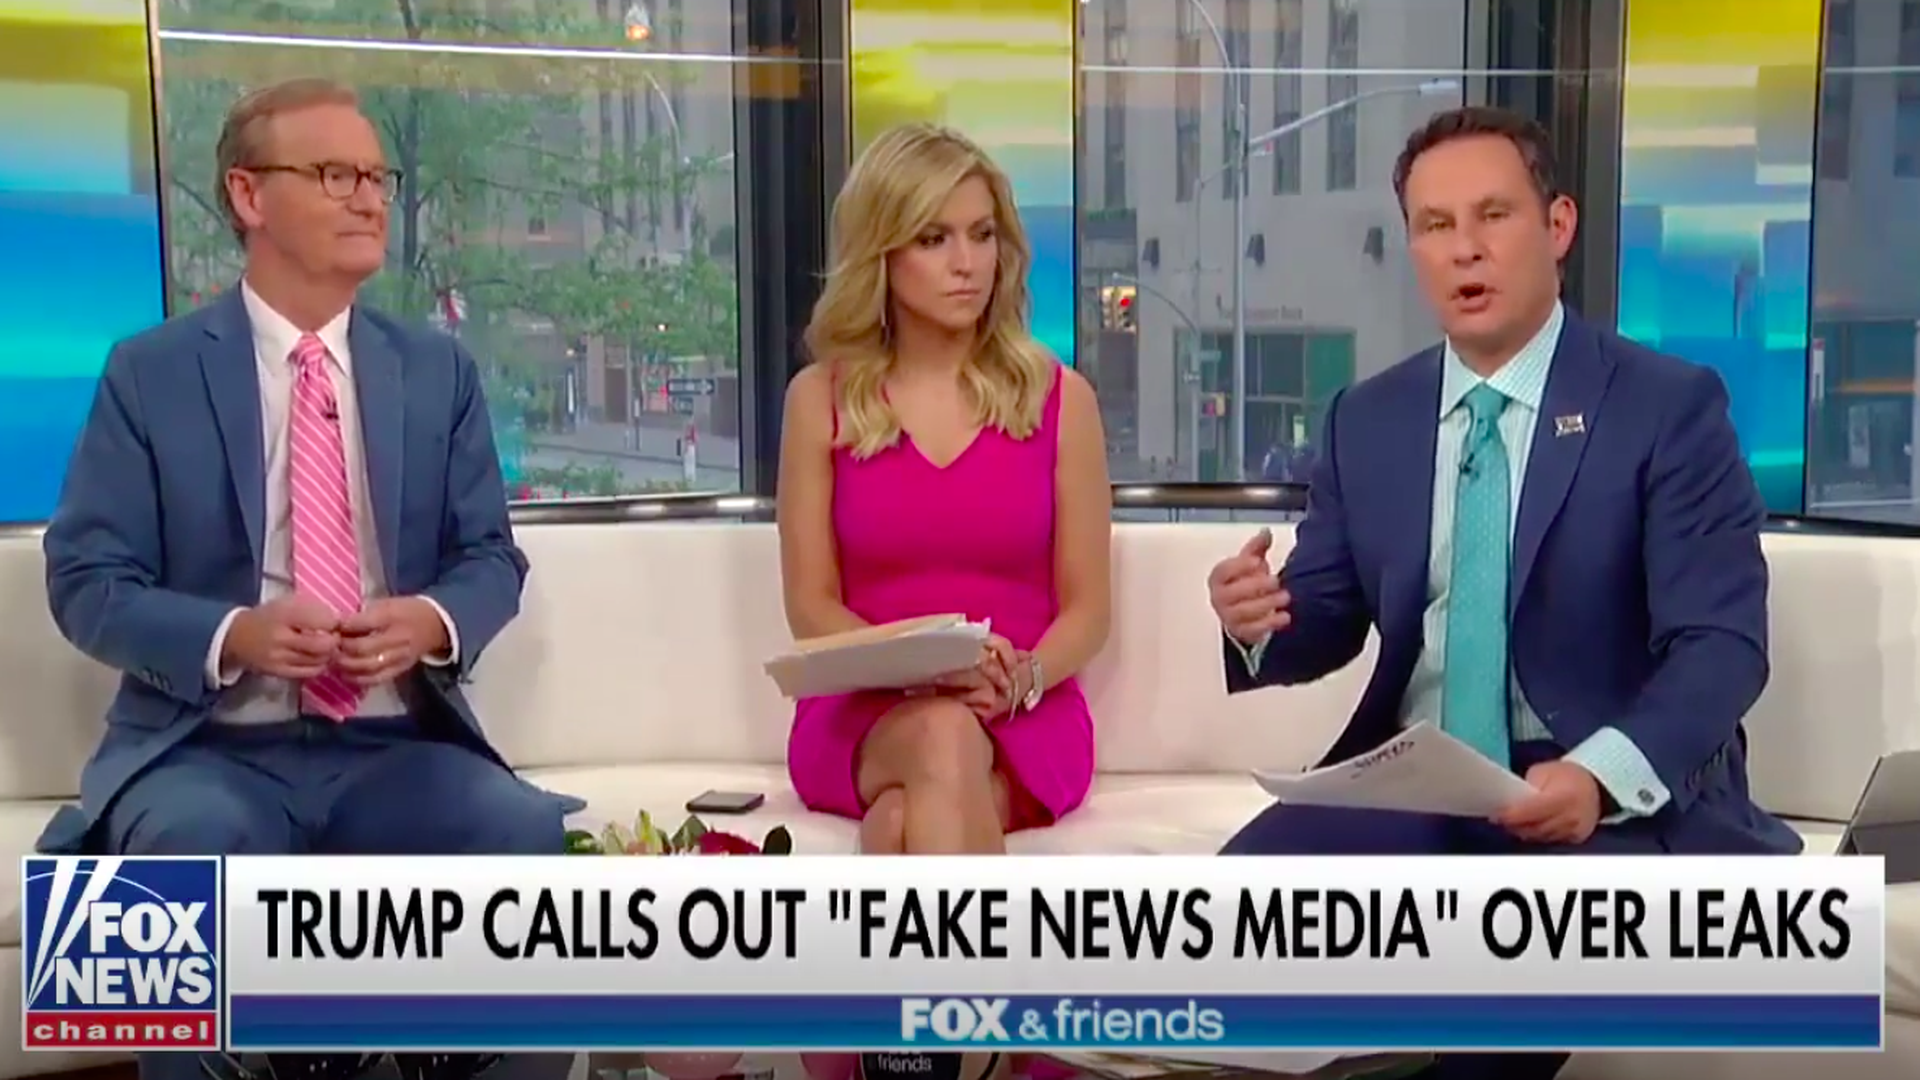 Fox & Friends co-host discuss the leaks coming out of the White House.